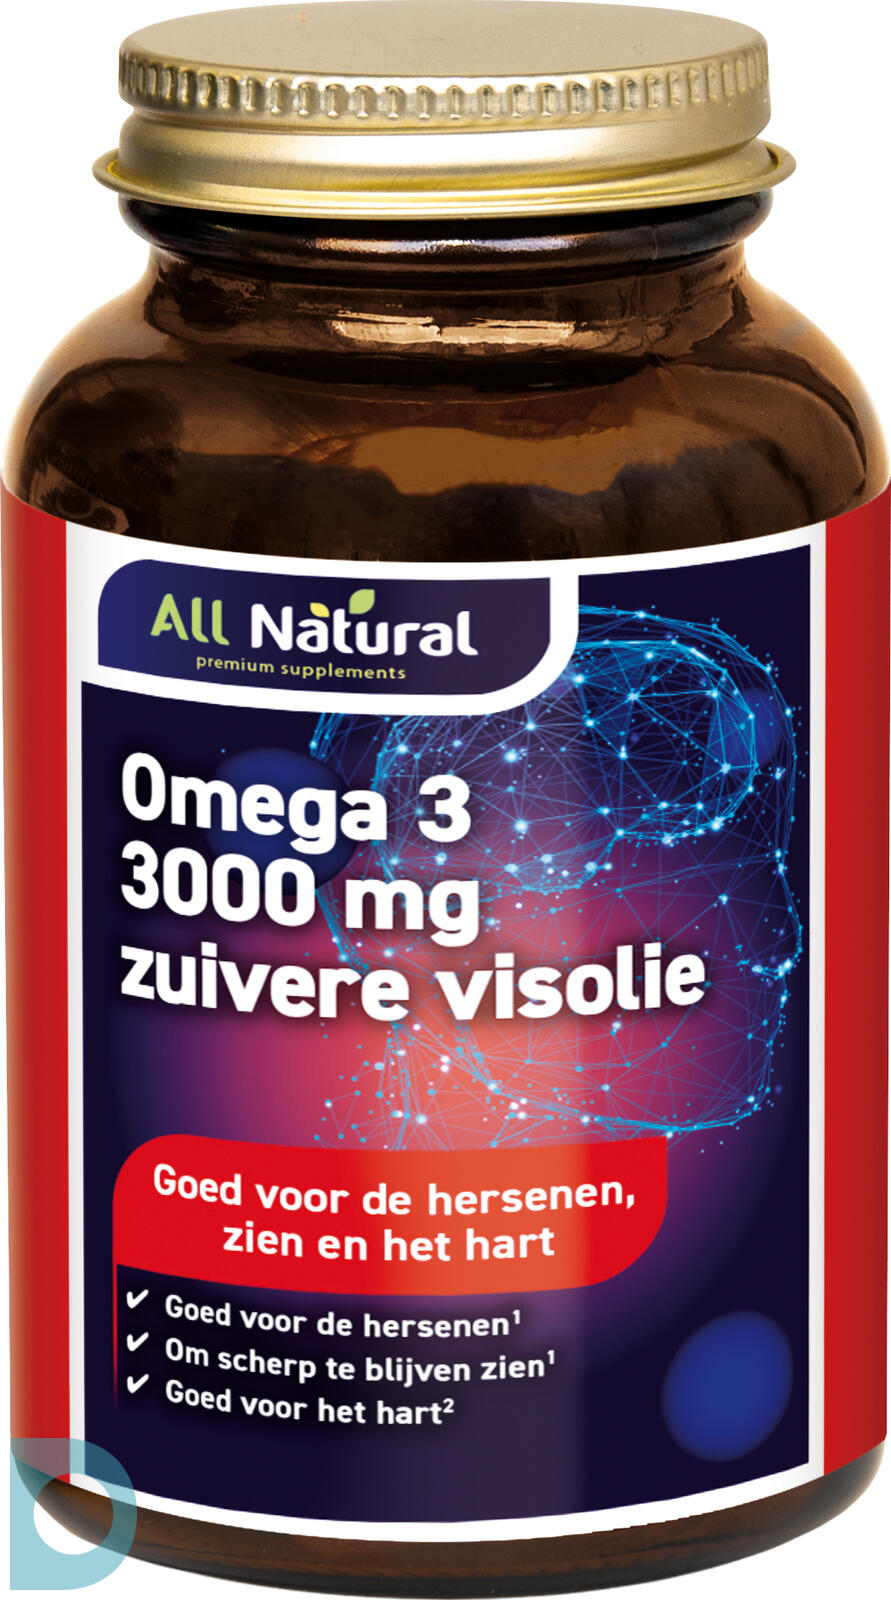 Vermoorden De schuld geven Mens All Natural Omega-3 3000 mg Zuivere Visolie Capsules 100CP